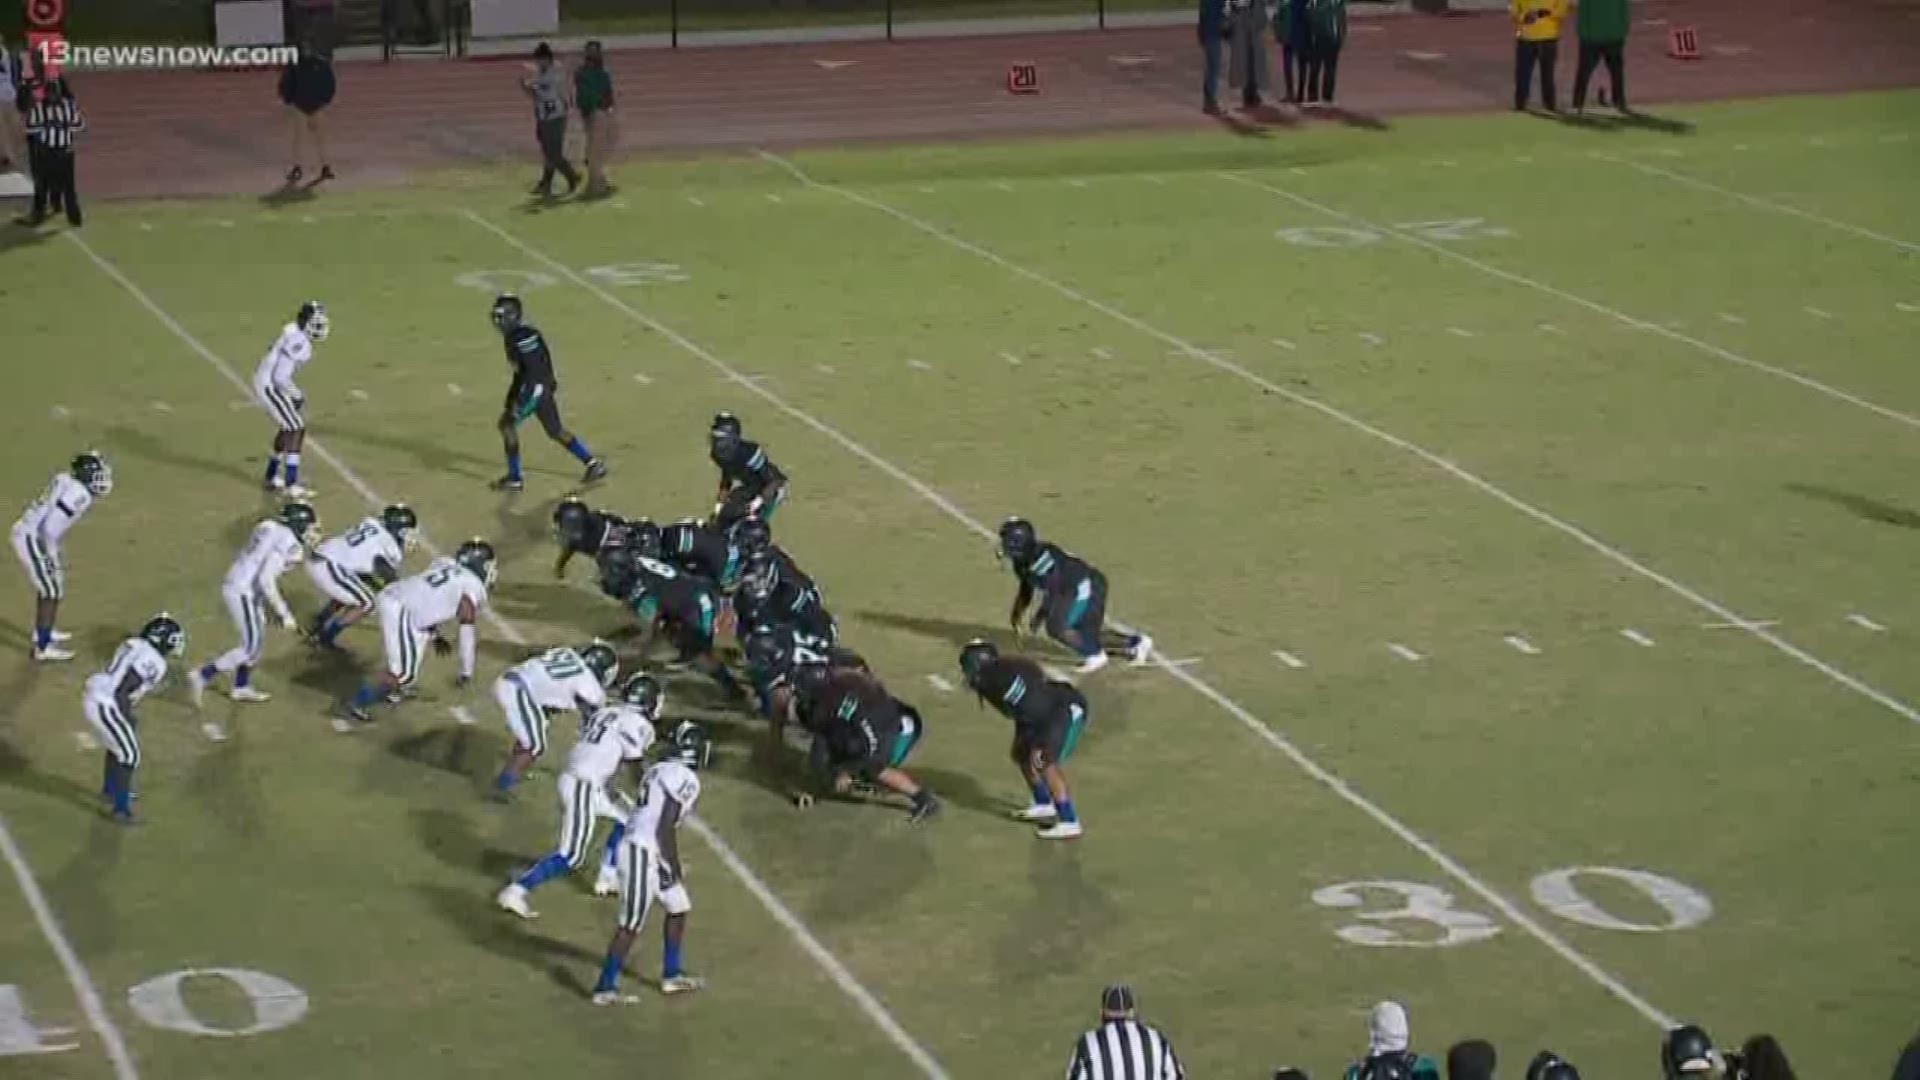 Woodside dominated Kecoughtan 47-3 in the Peninsula District.